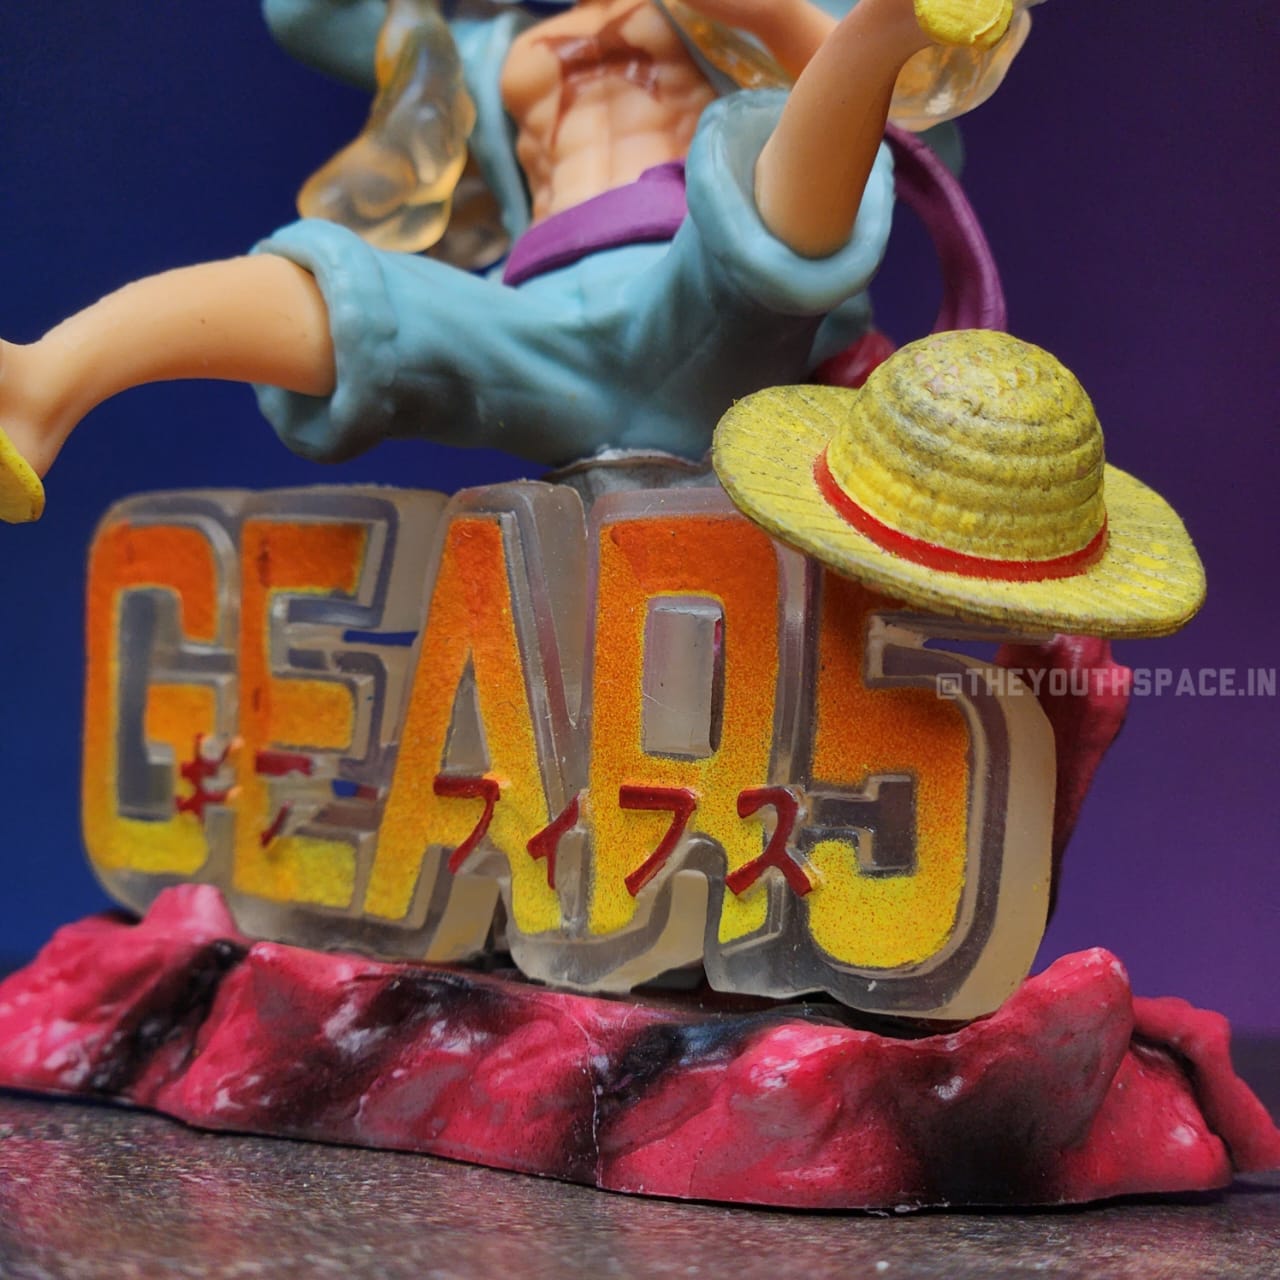 Luffy Gear 5 Action Figure